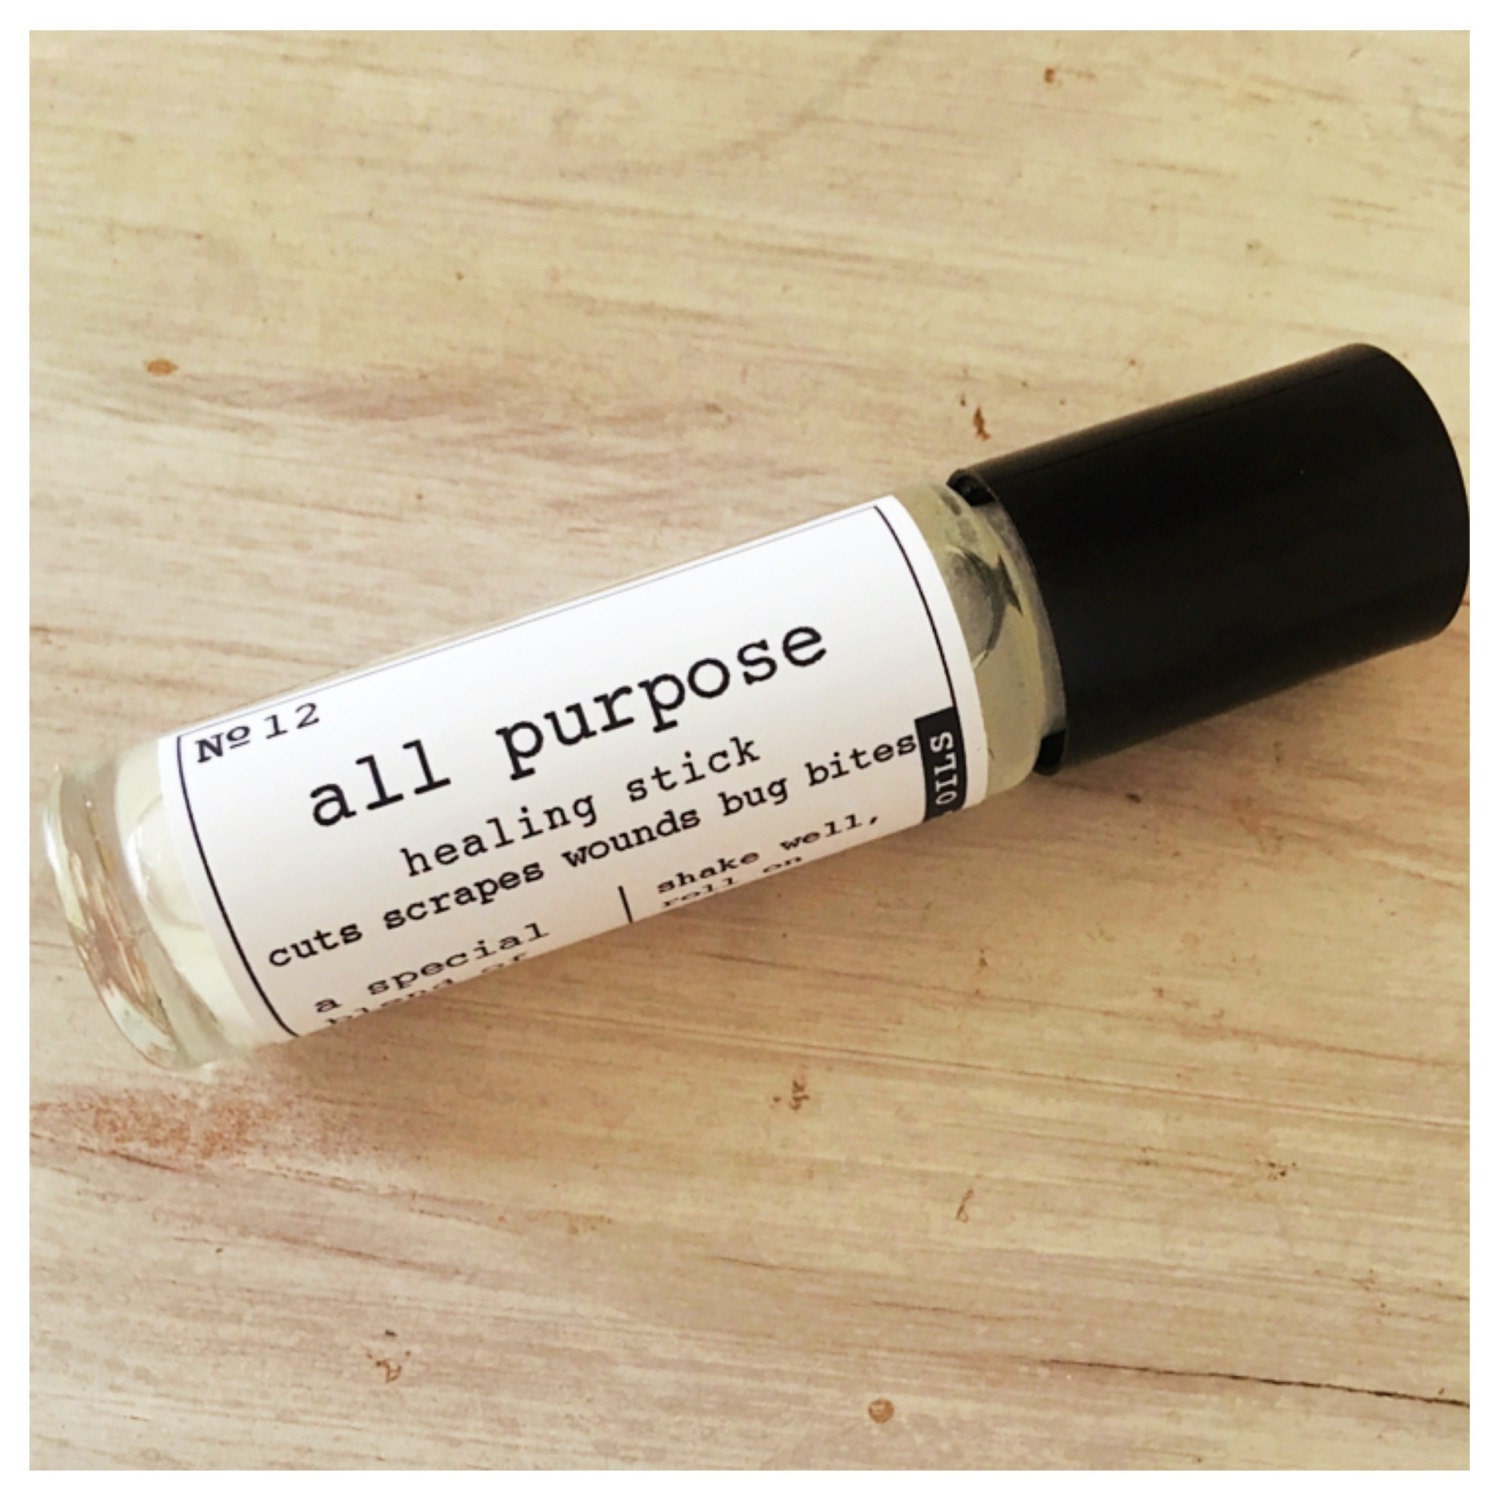 All Purpose Roller Ball Blend For Cuts, Scrapes, Bruises, Bug Bites/Natural Remedy Essential Oils